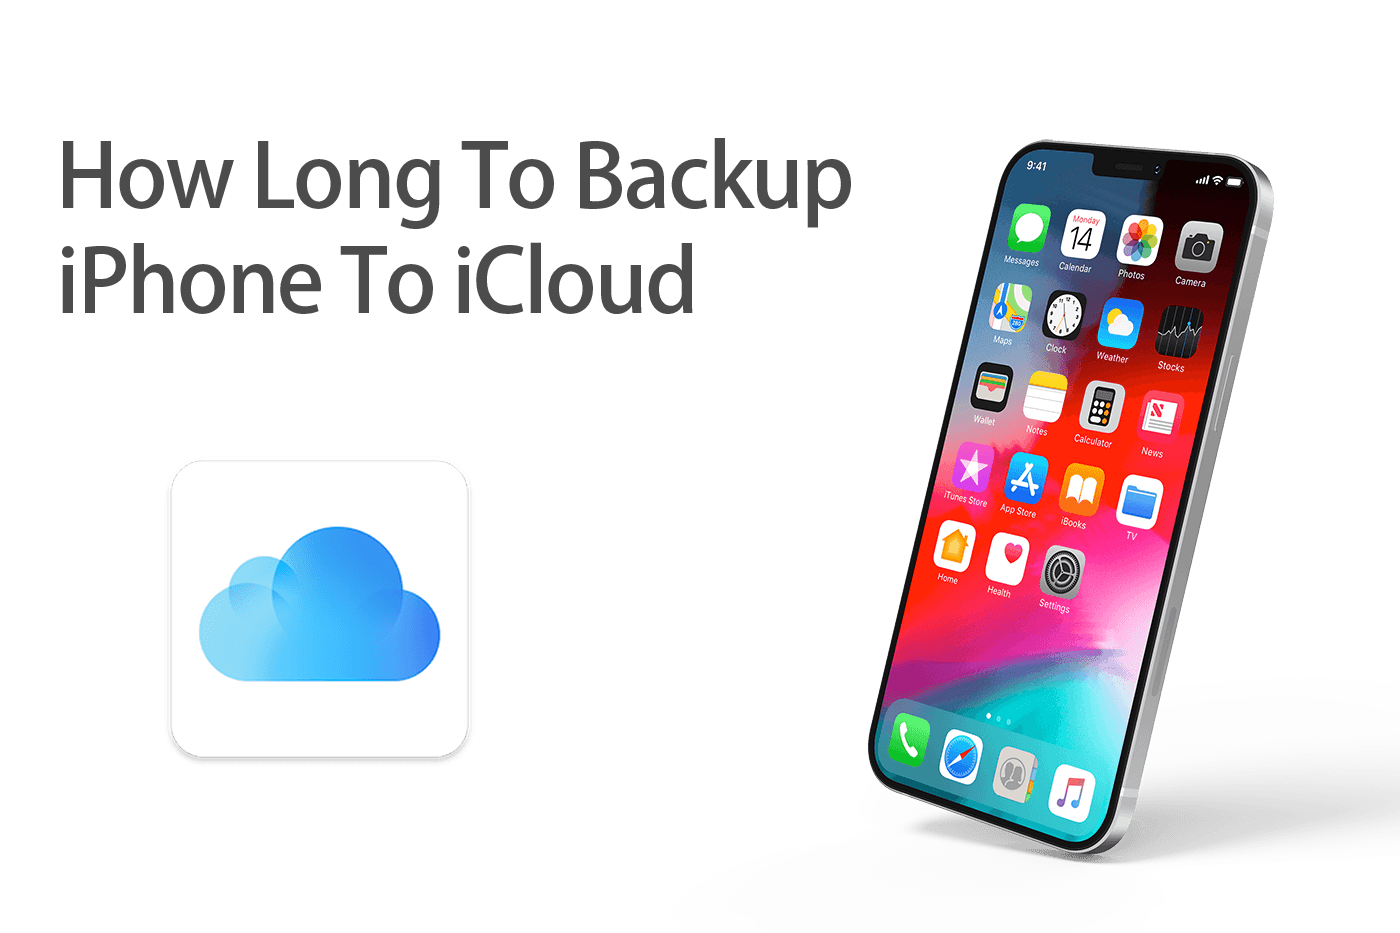 How Long Does It Take To Backup iPhone To iCloud